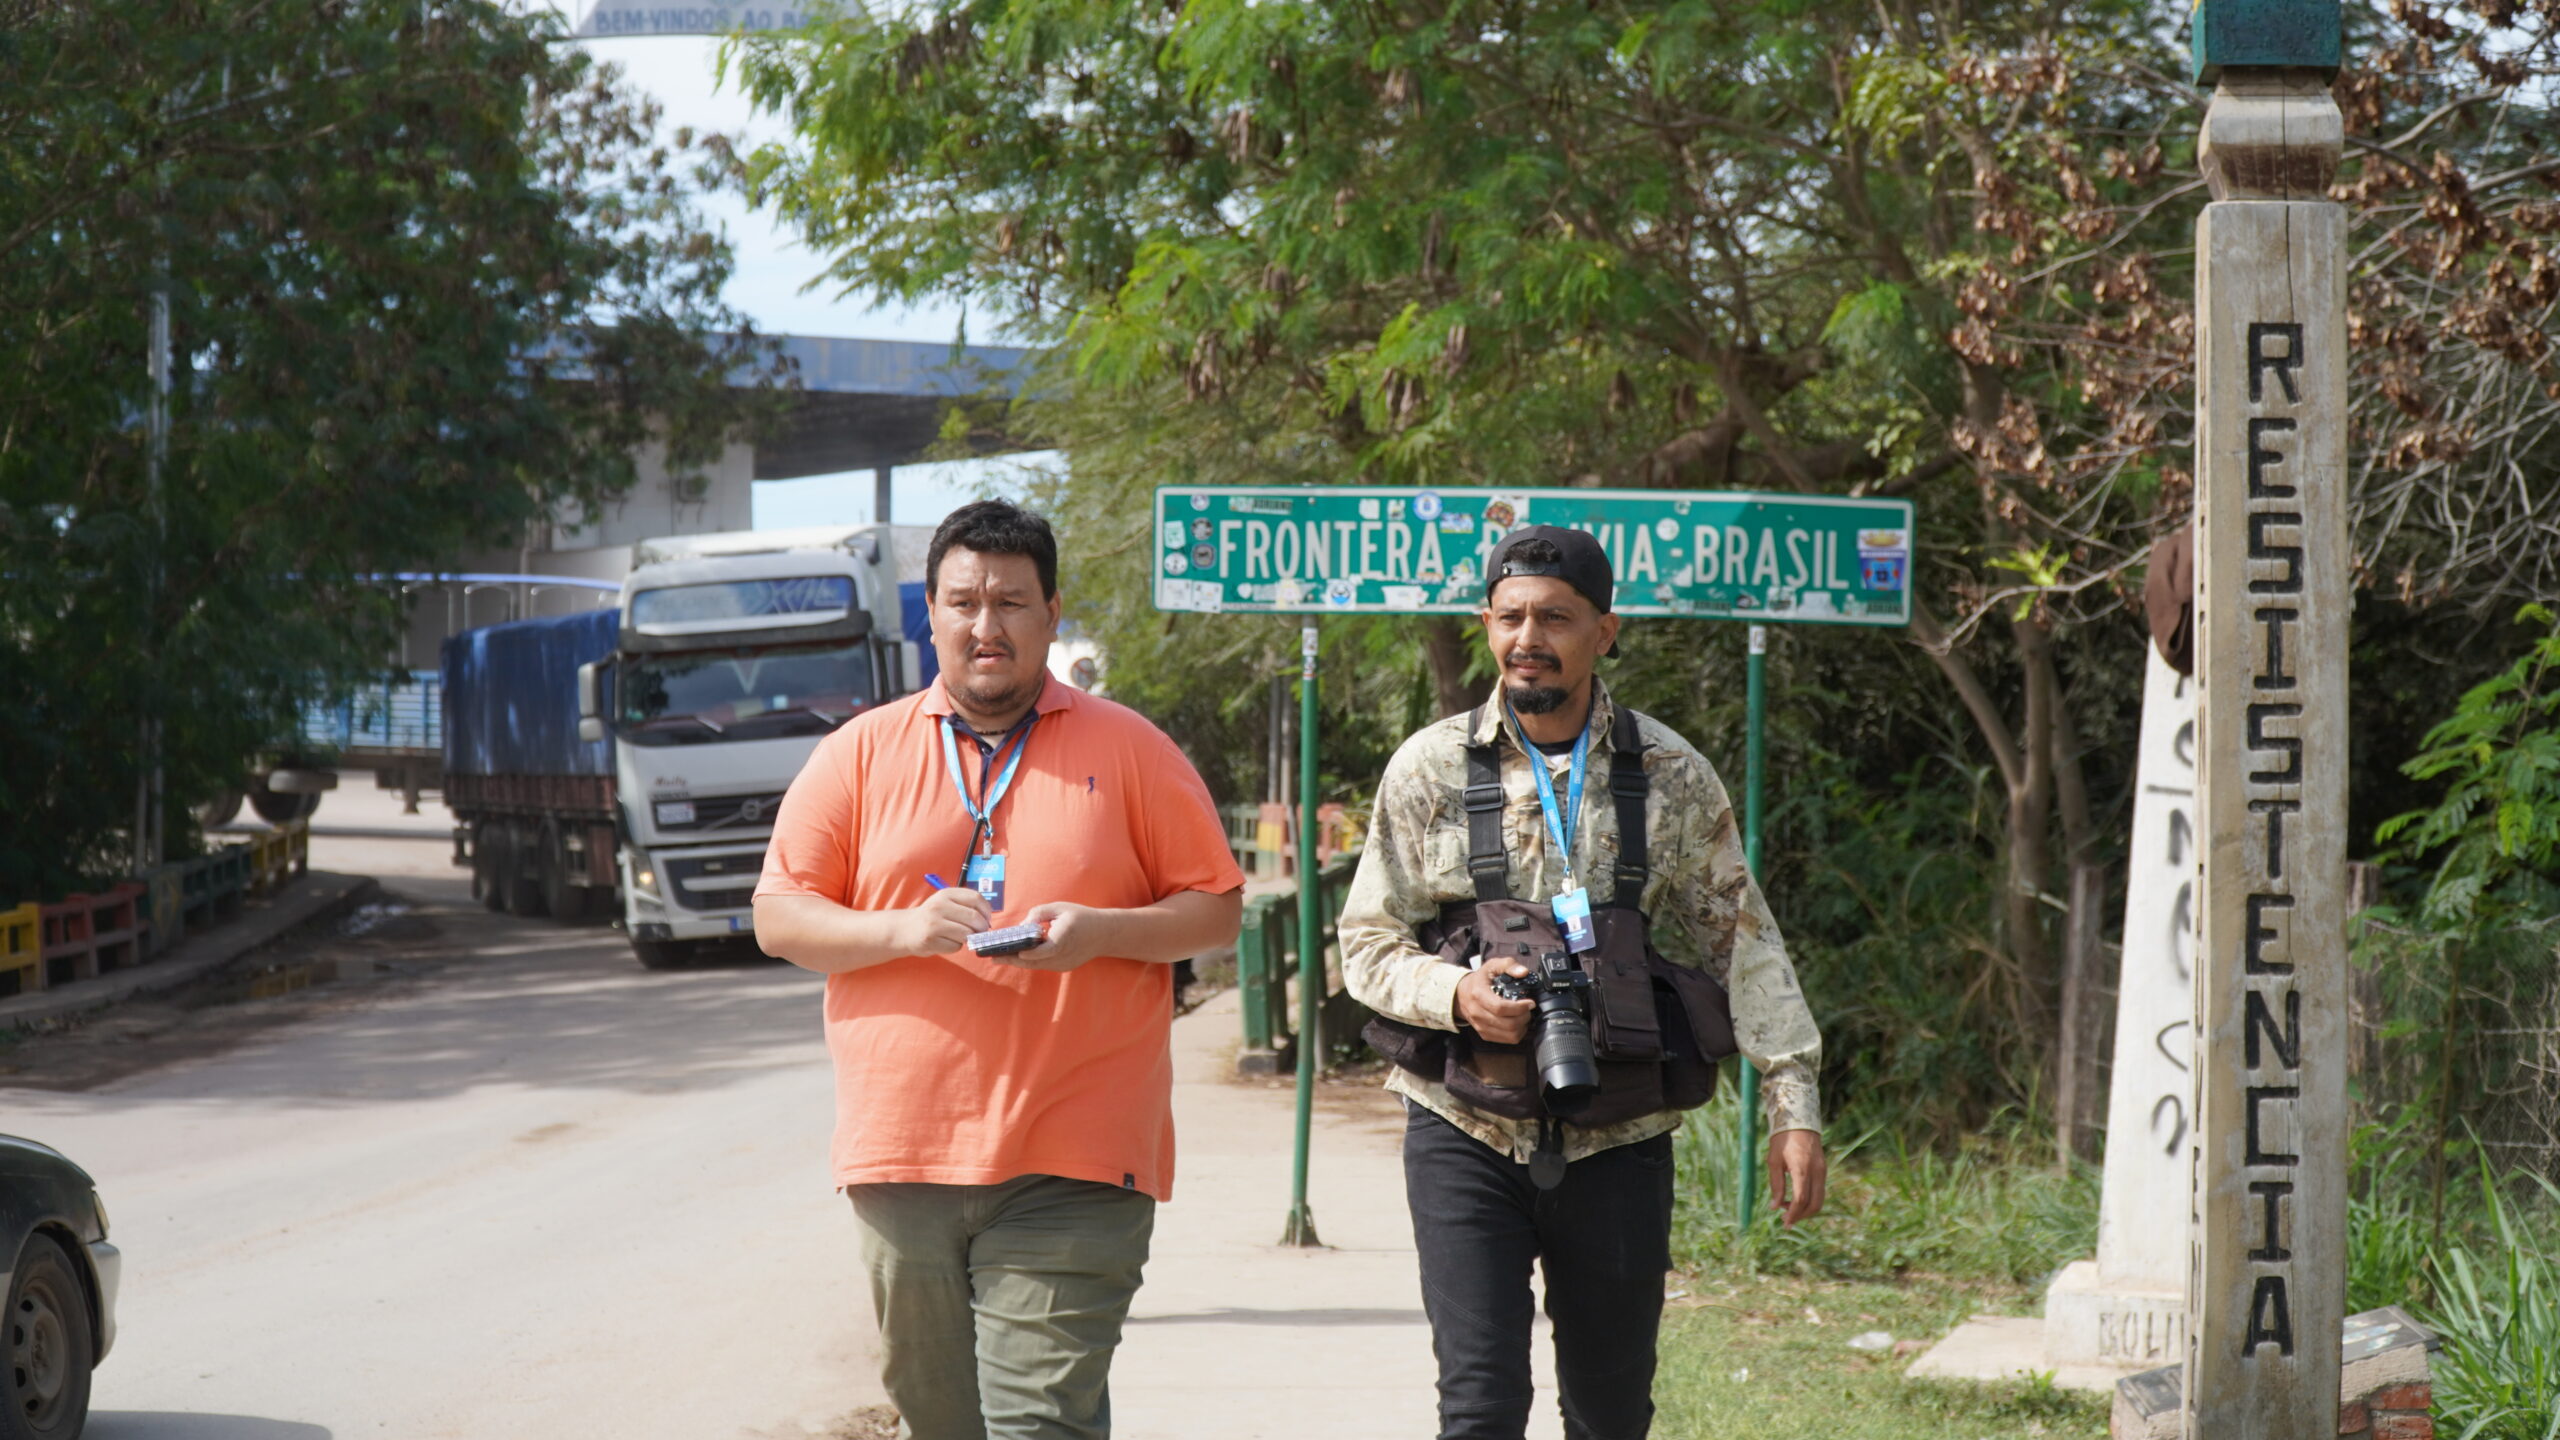 Two men, one with a notebook and the other one with a camera, walk towards the camera at a border crossing in South America